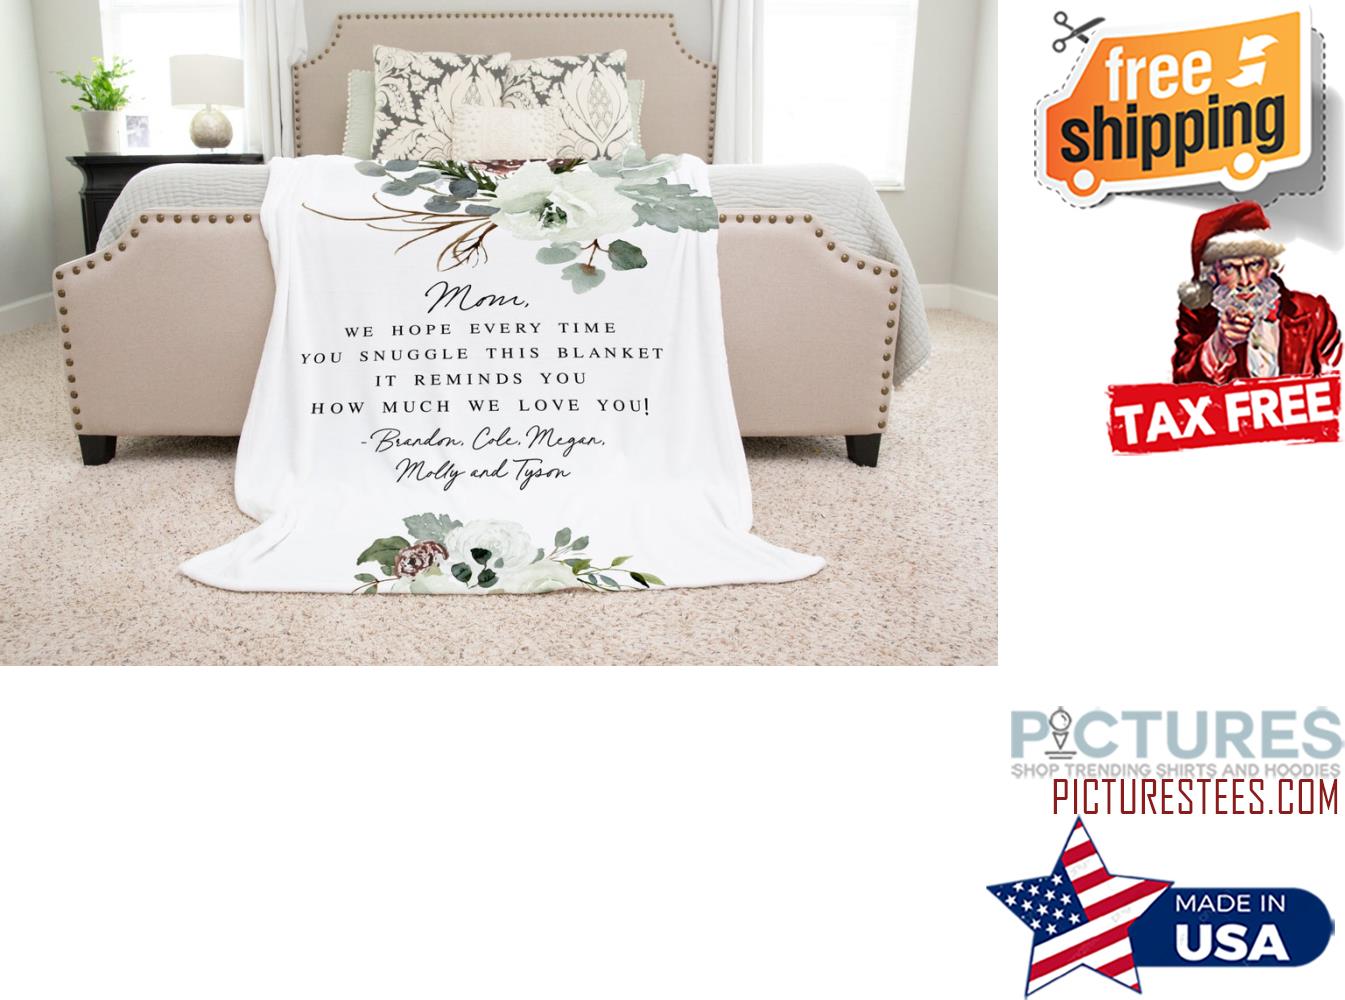 https://images.picturestees.com/2021/12/gift-from-kids-grandma-quote-custom-quote-blanket-christmas-blanket-christmas-present-floral-style-blanket-picturestees-shirt.jpg